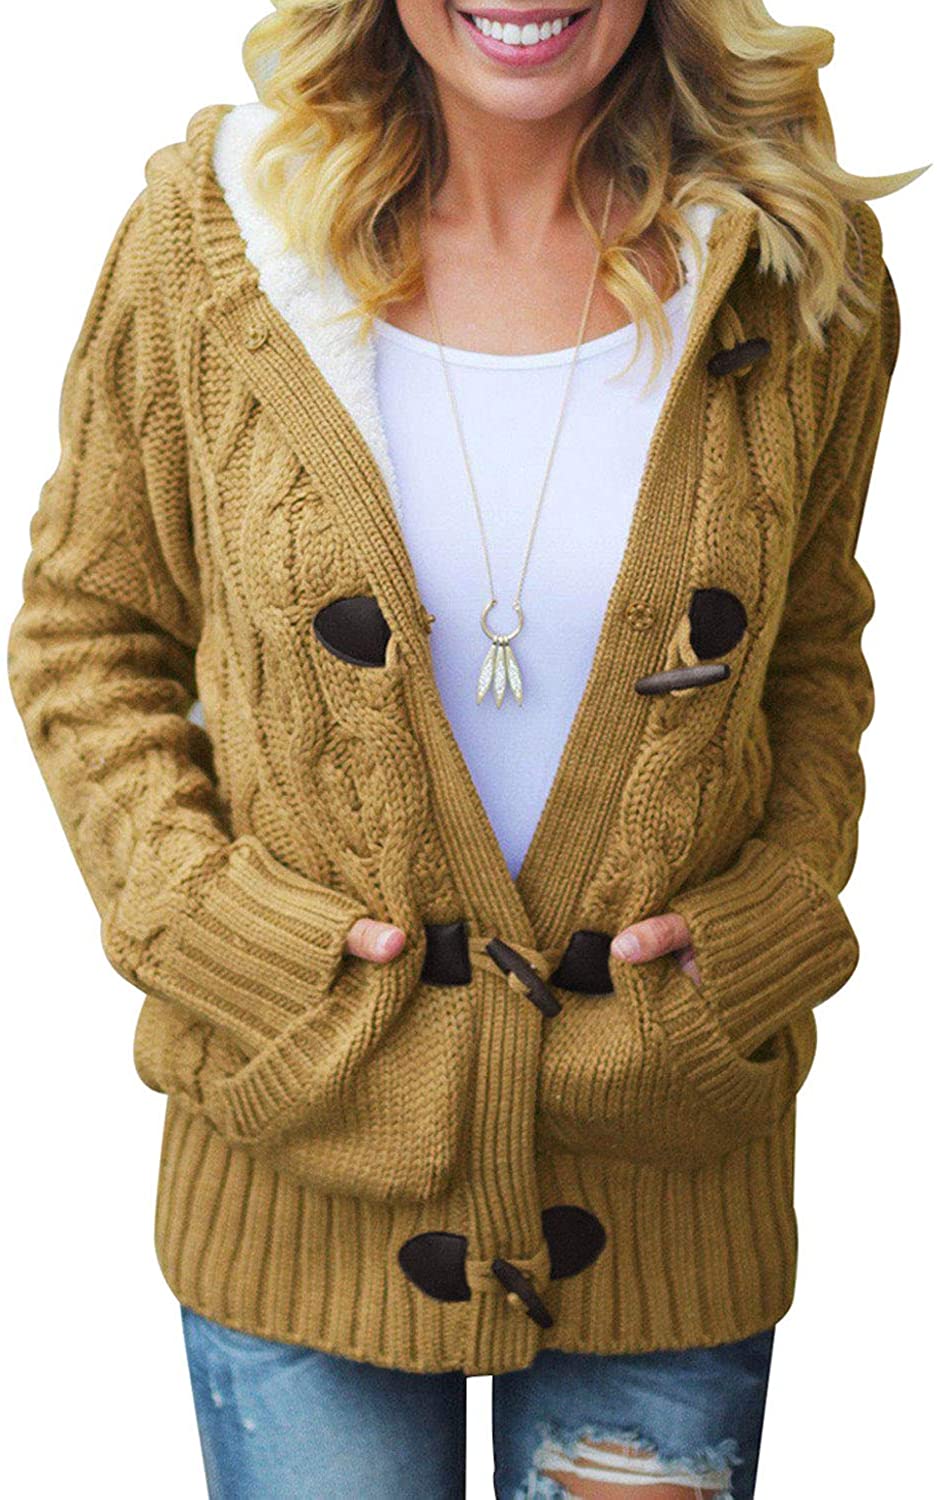 Mens Cardigan Sweaters Cable Knit Long Sleeve Loose Fit Color Block Casual Fall Cardigans